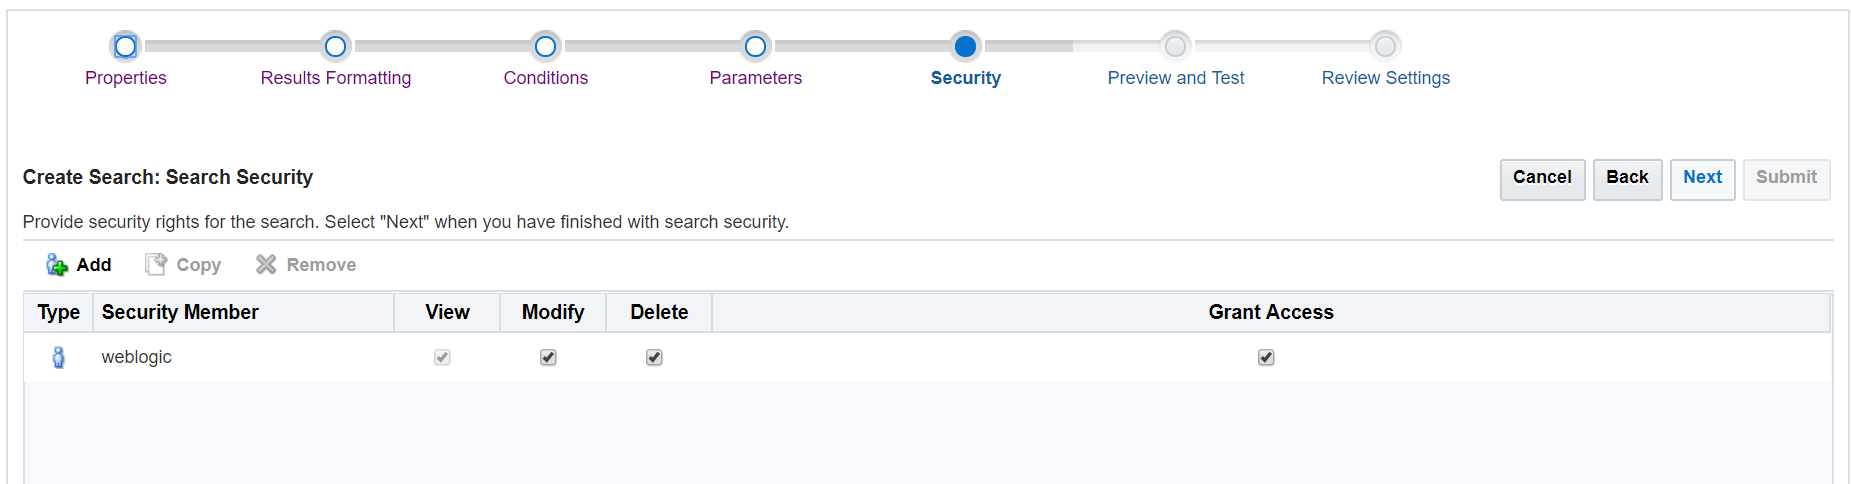 Create Search: Search Security